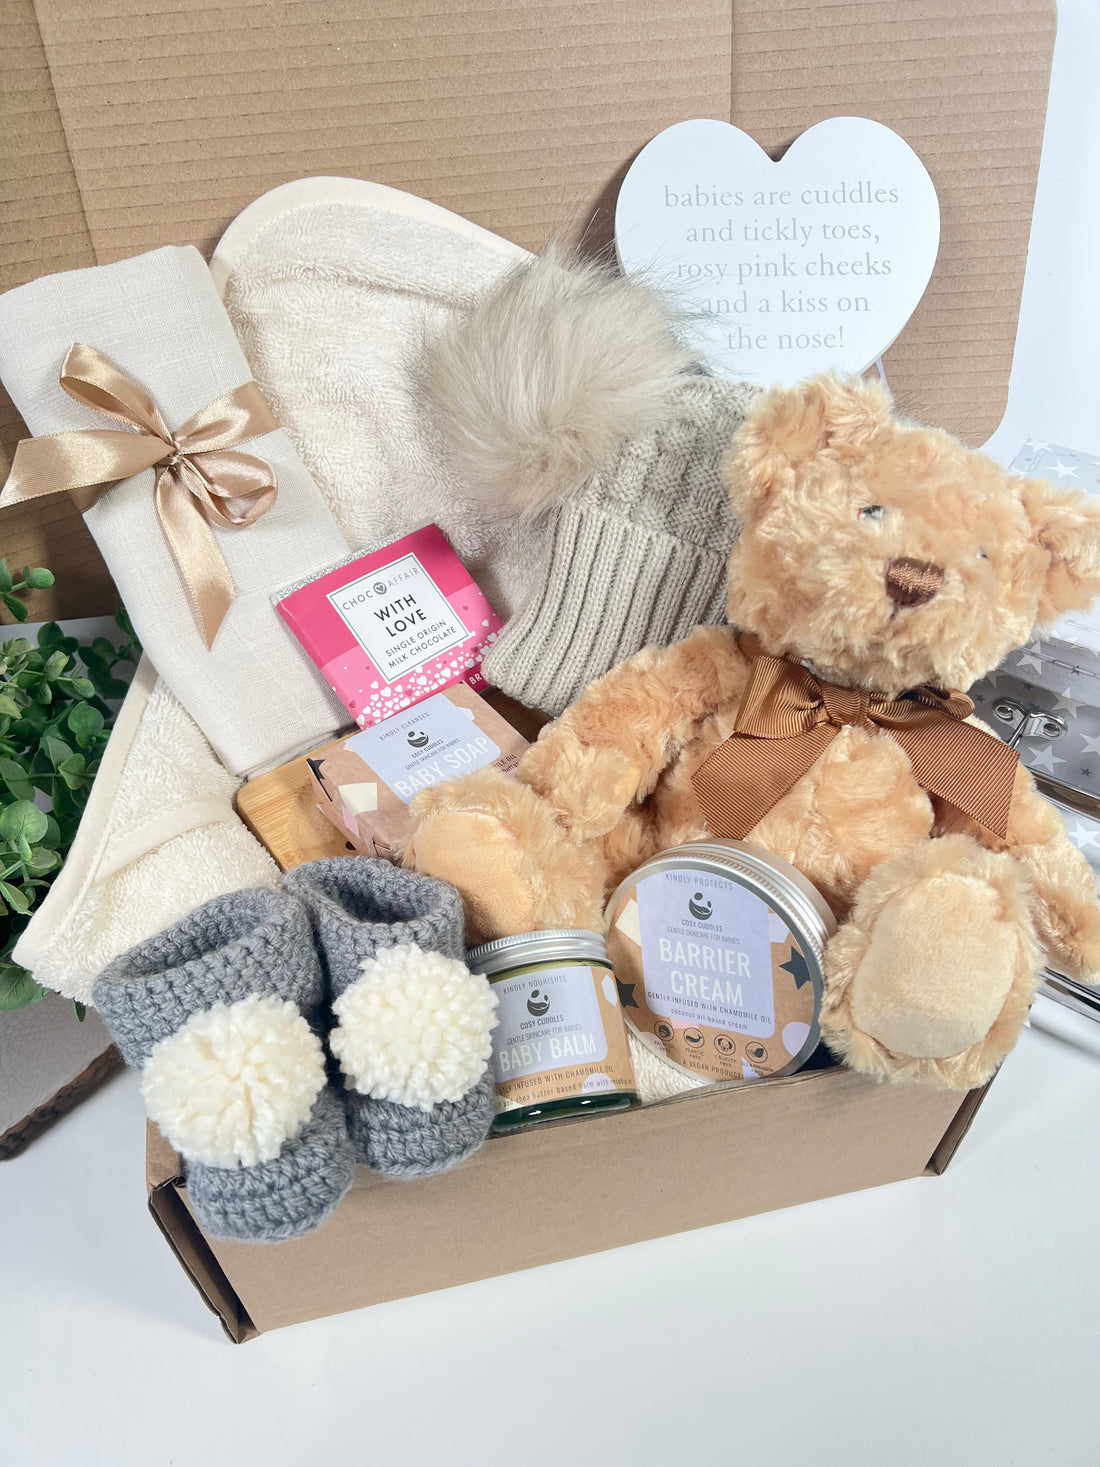 Our new eco friendly baby gift boxes and baby hampers